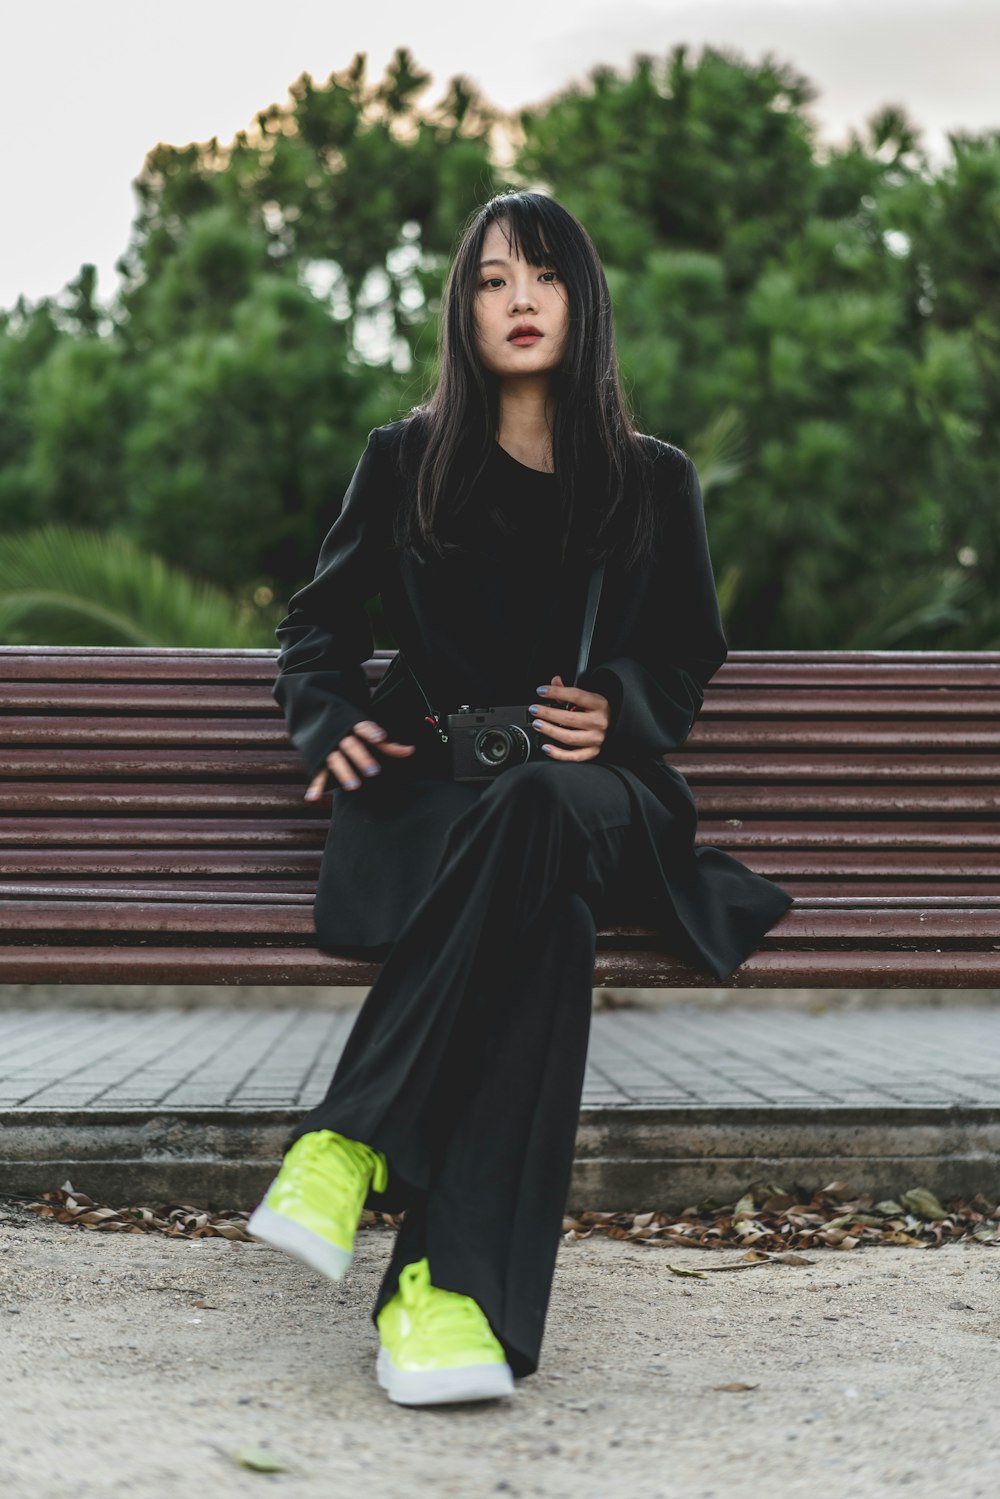 woman wearing black pea coat and black pants sitting on brown bench